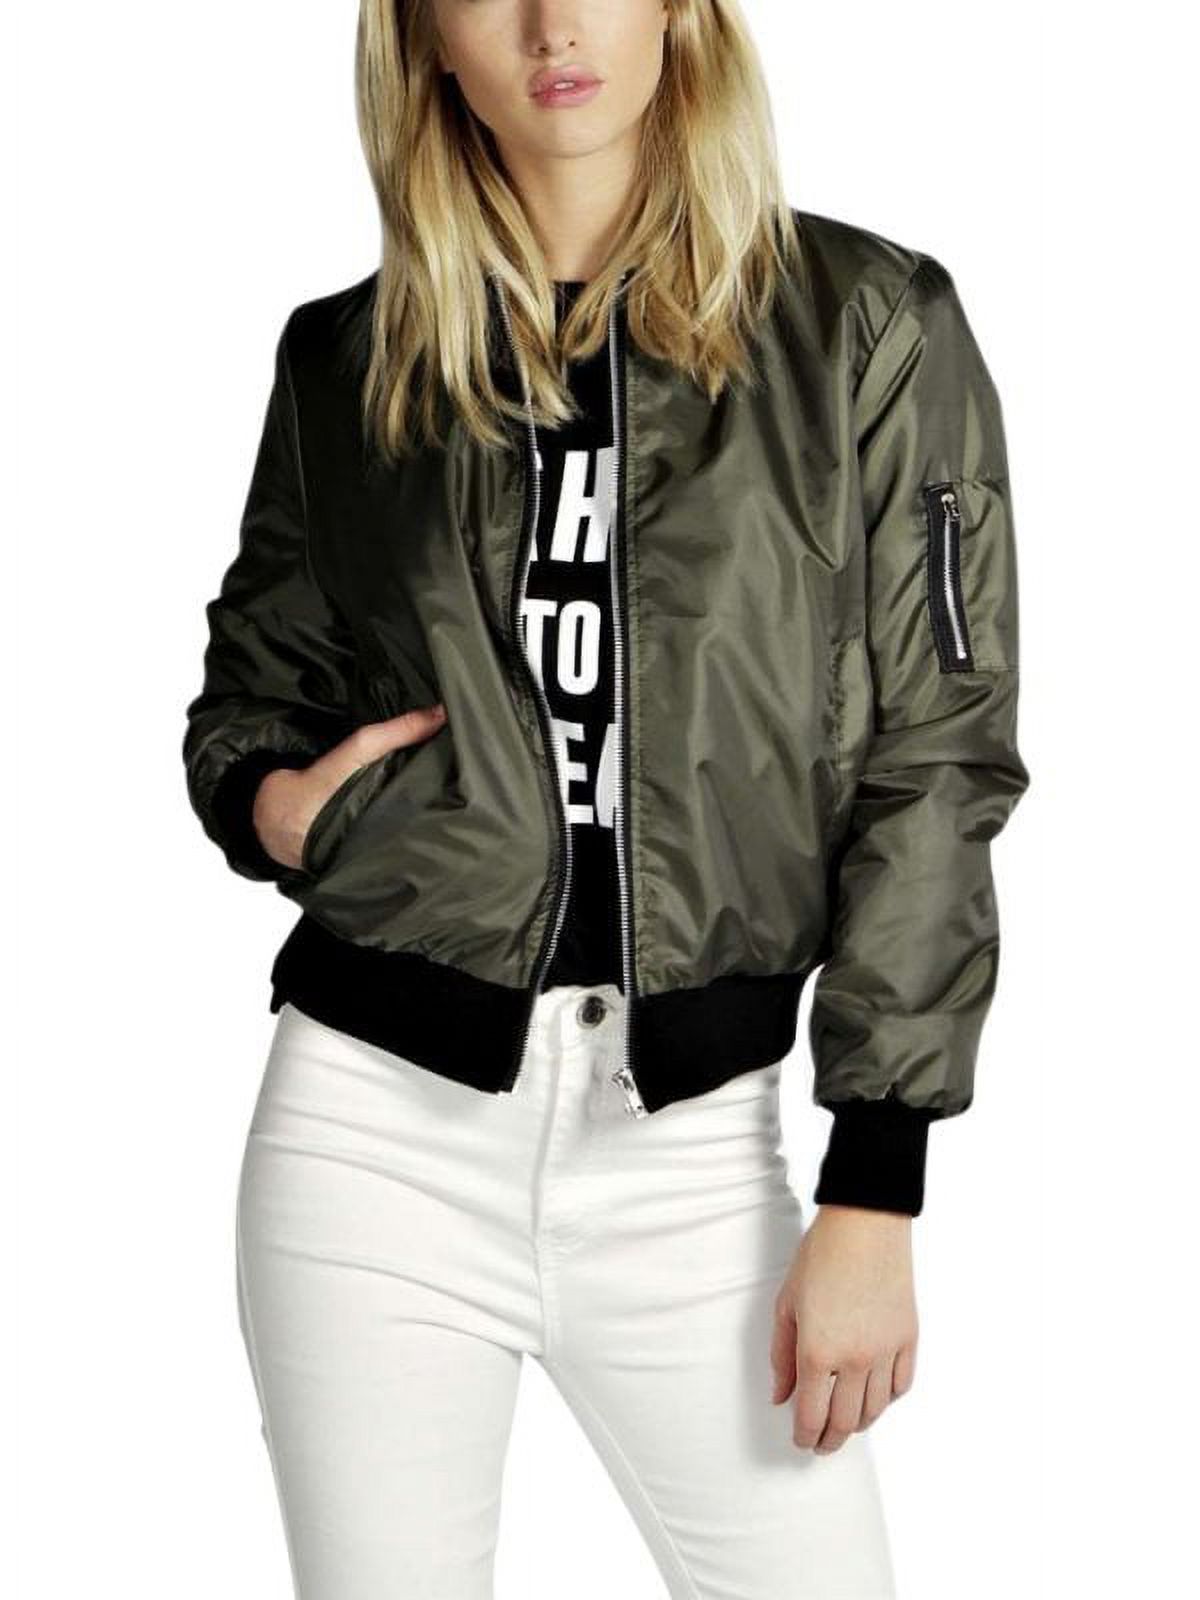 Womens Classic Full-Zip Quilted Jacket Short Bomber Jacket Coat - image 1 of 2